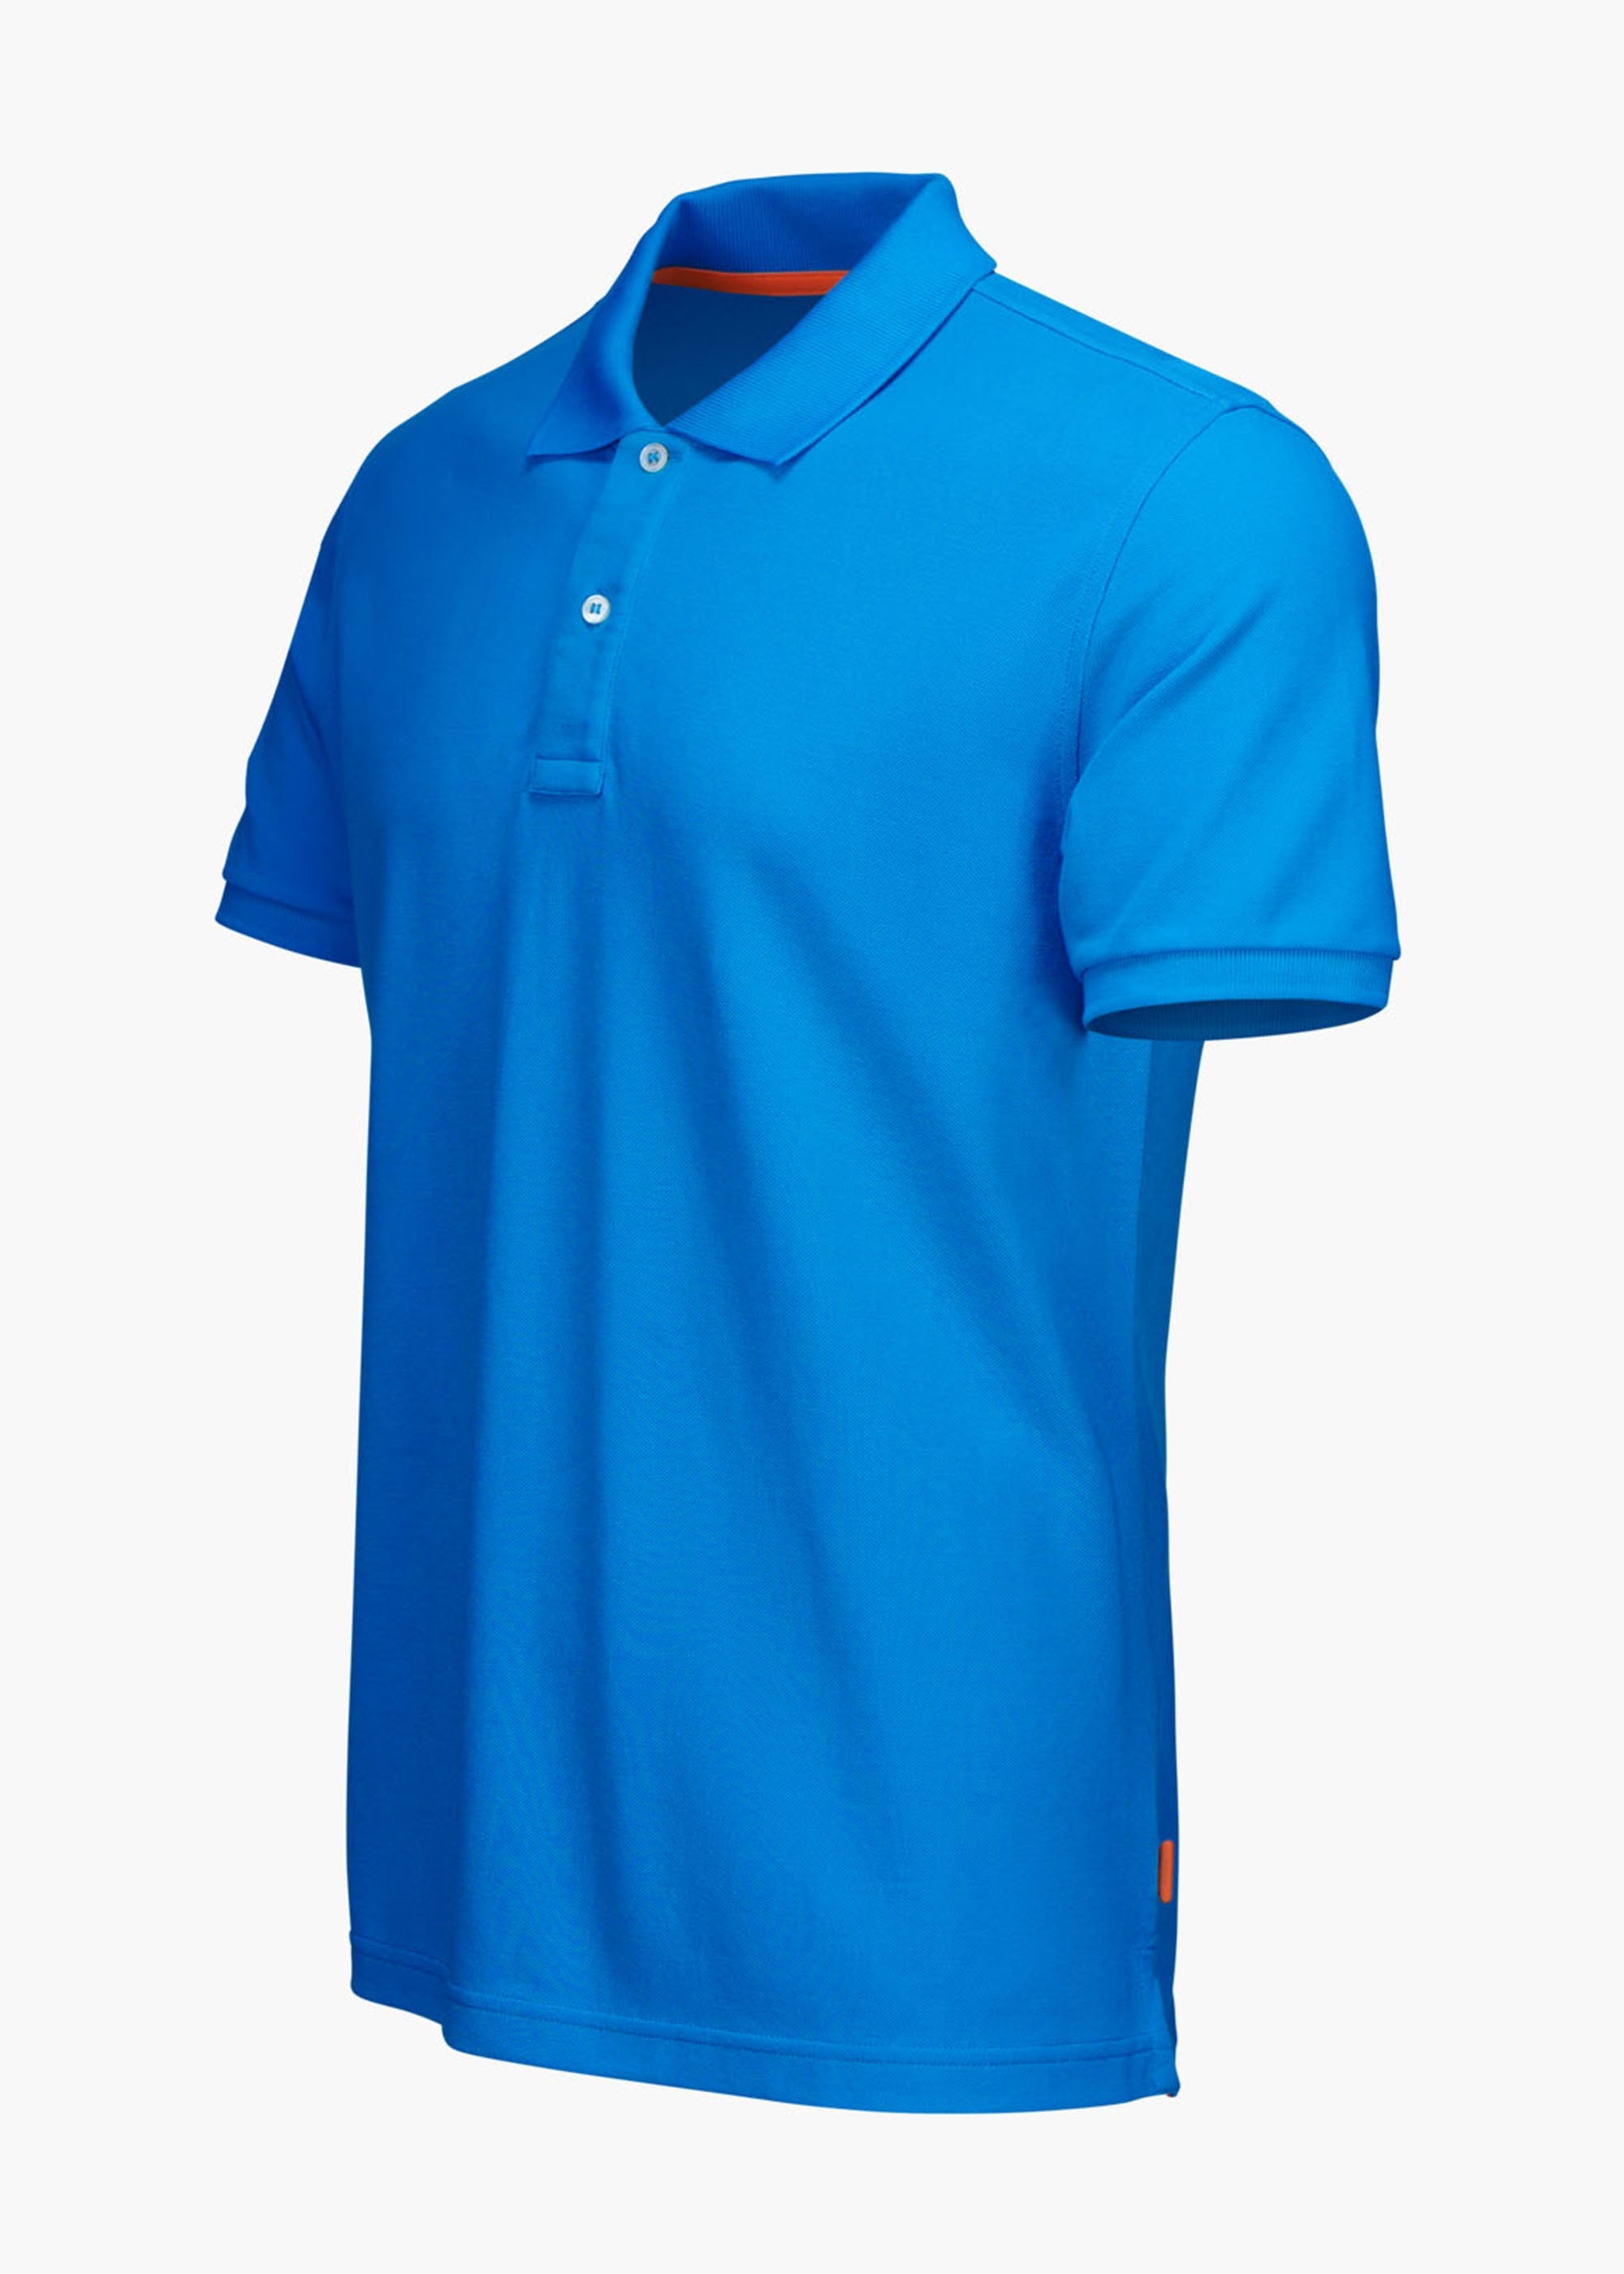 Sunnmore Polo in Sail Blue | SWIMS SWIMS Mens for 